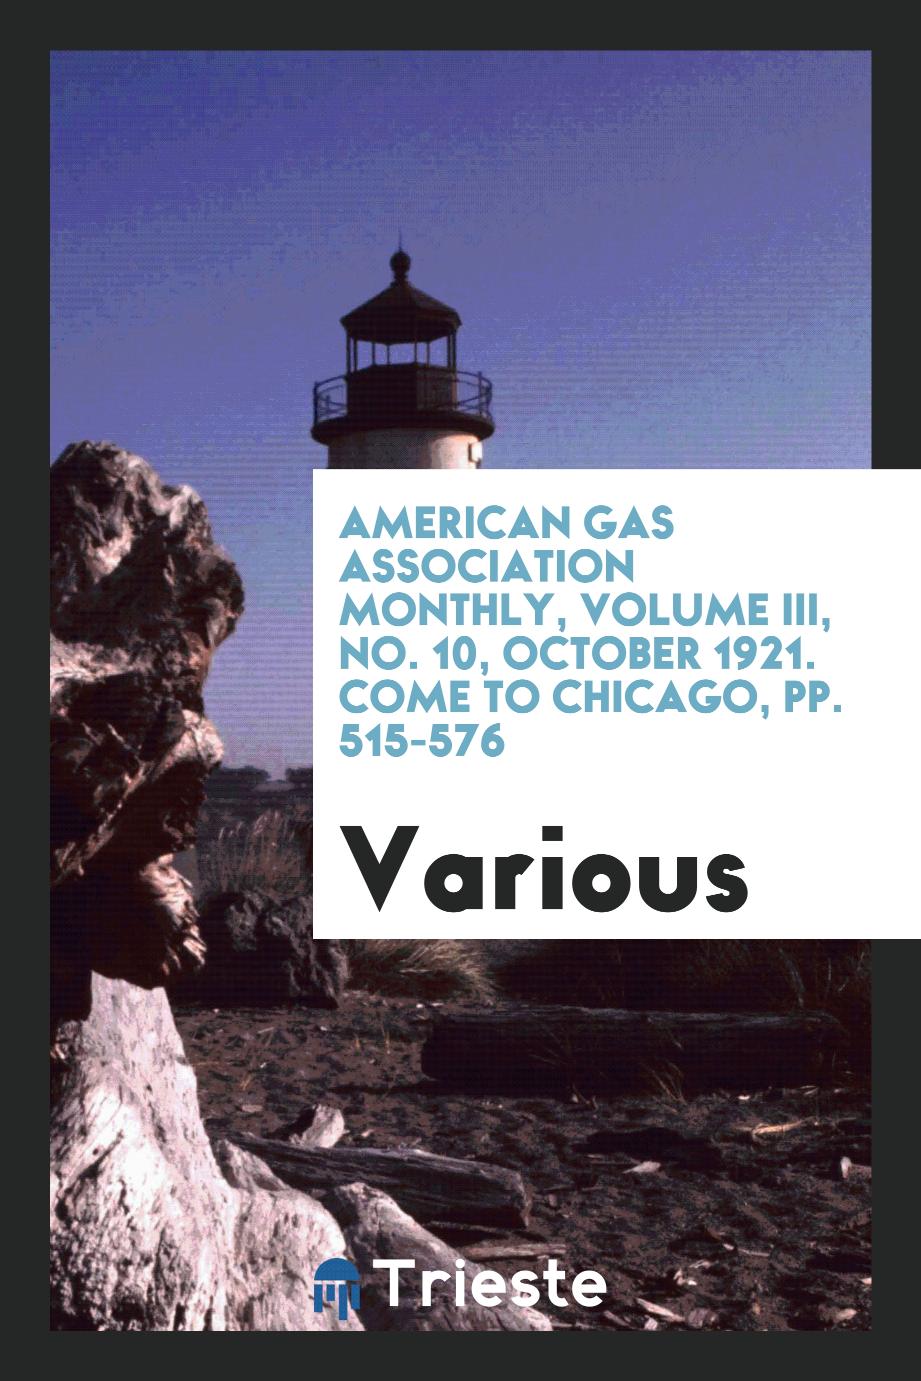 American gas association monthly, Volume III, No. 10, October 1921. Come to Chicago, pp. 515-576